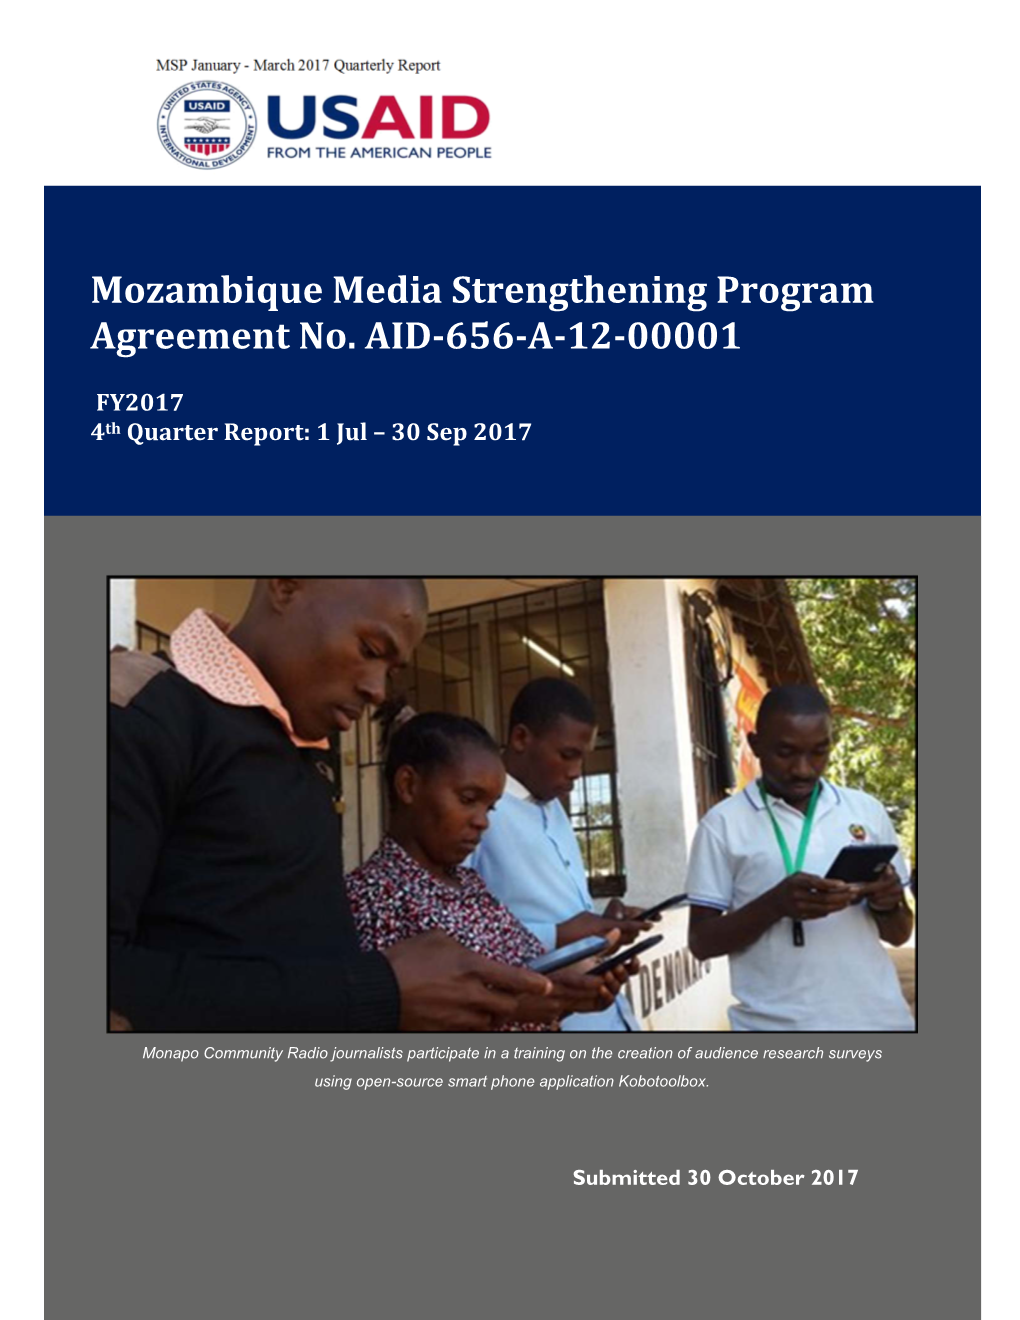 Mozambique Media Strengthening Program Agreement No. AID-656-A